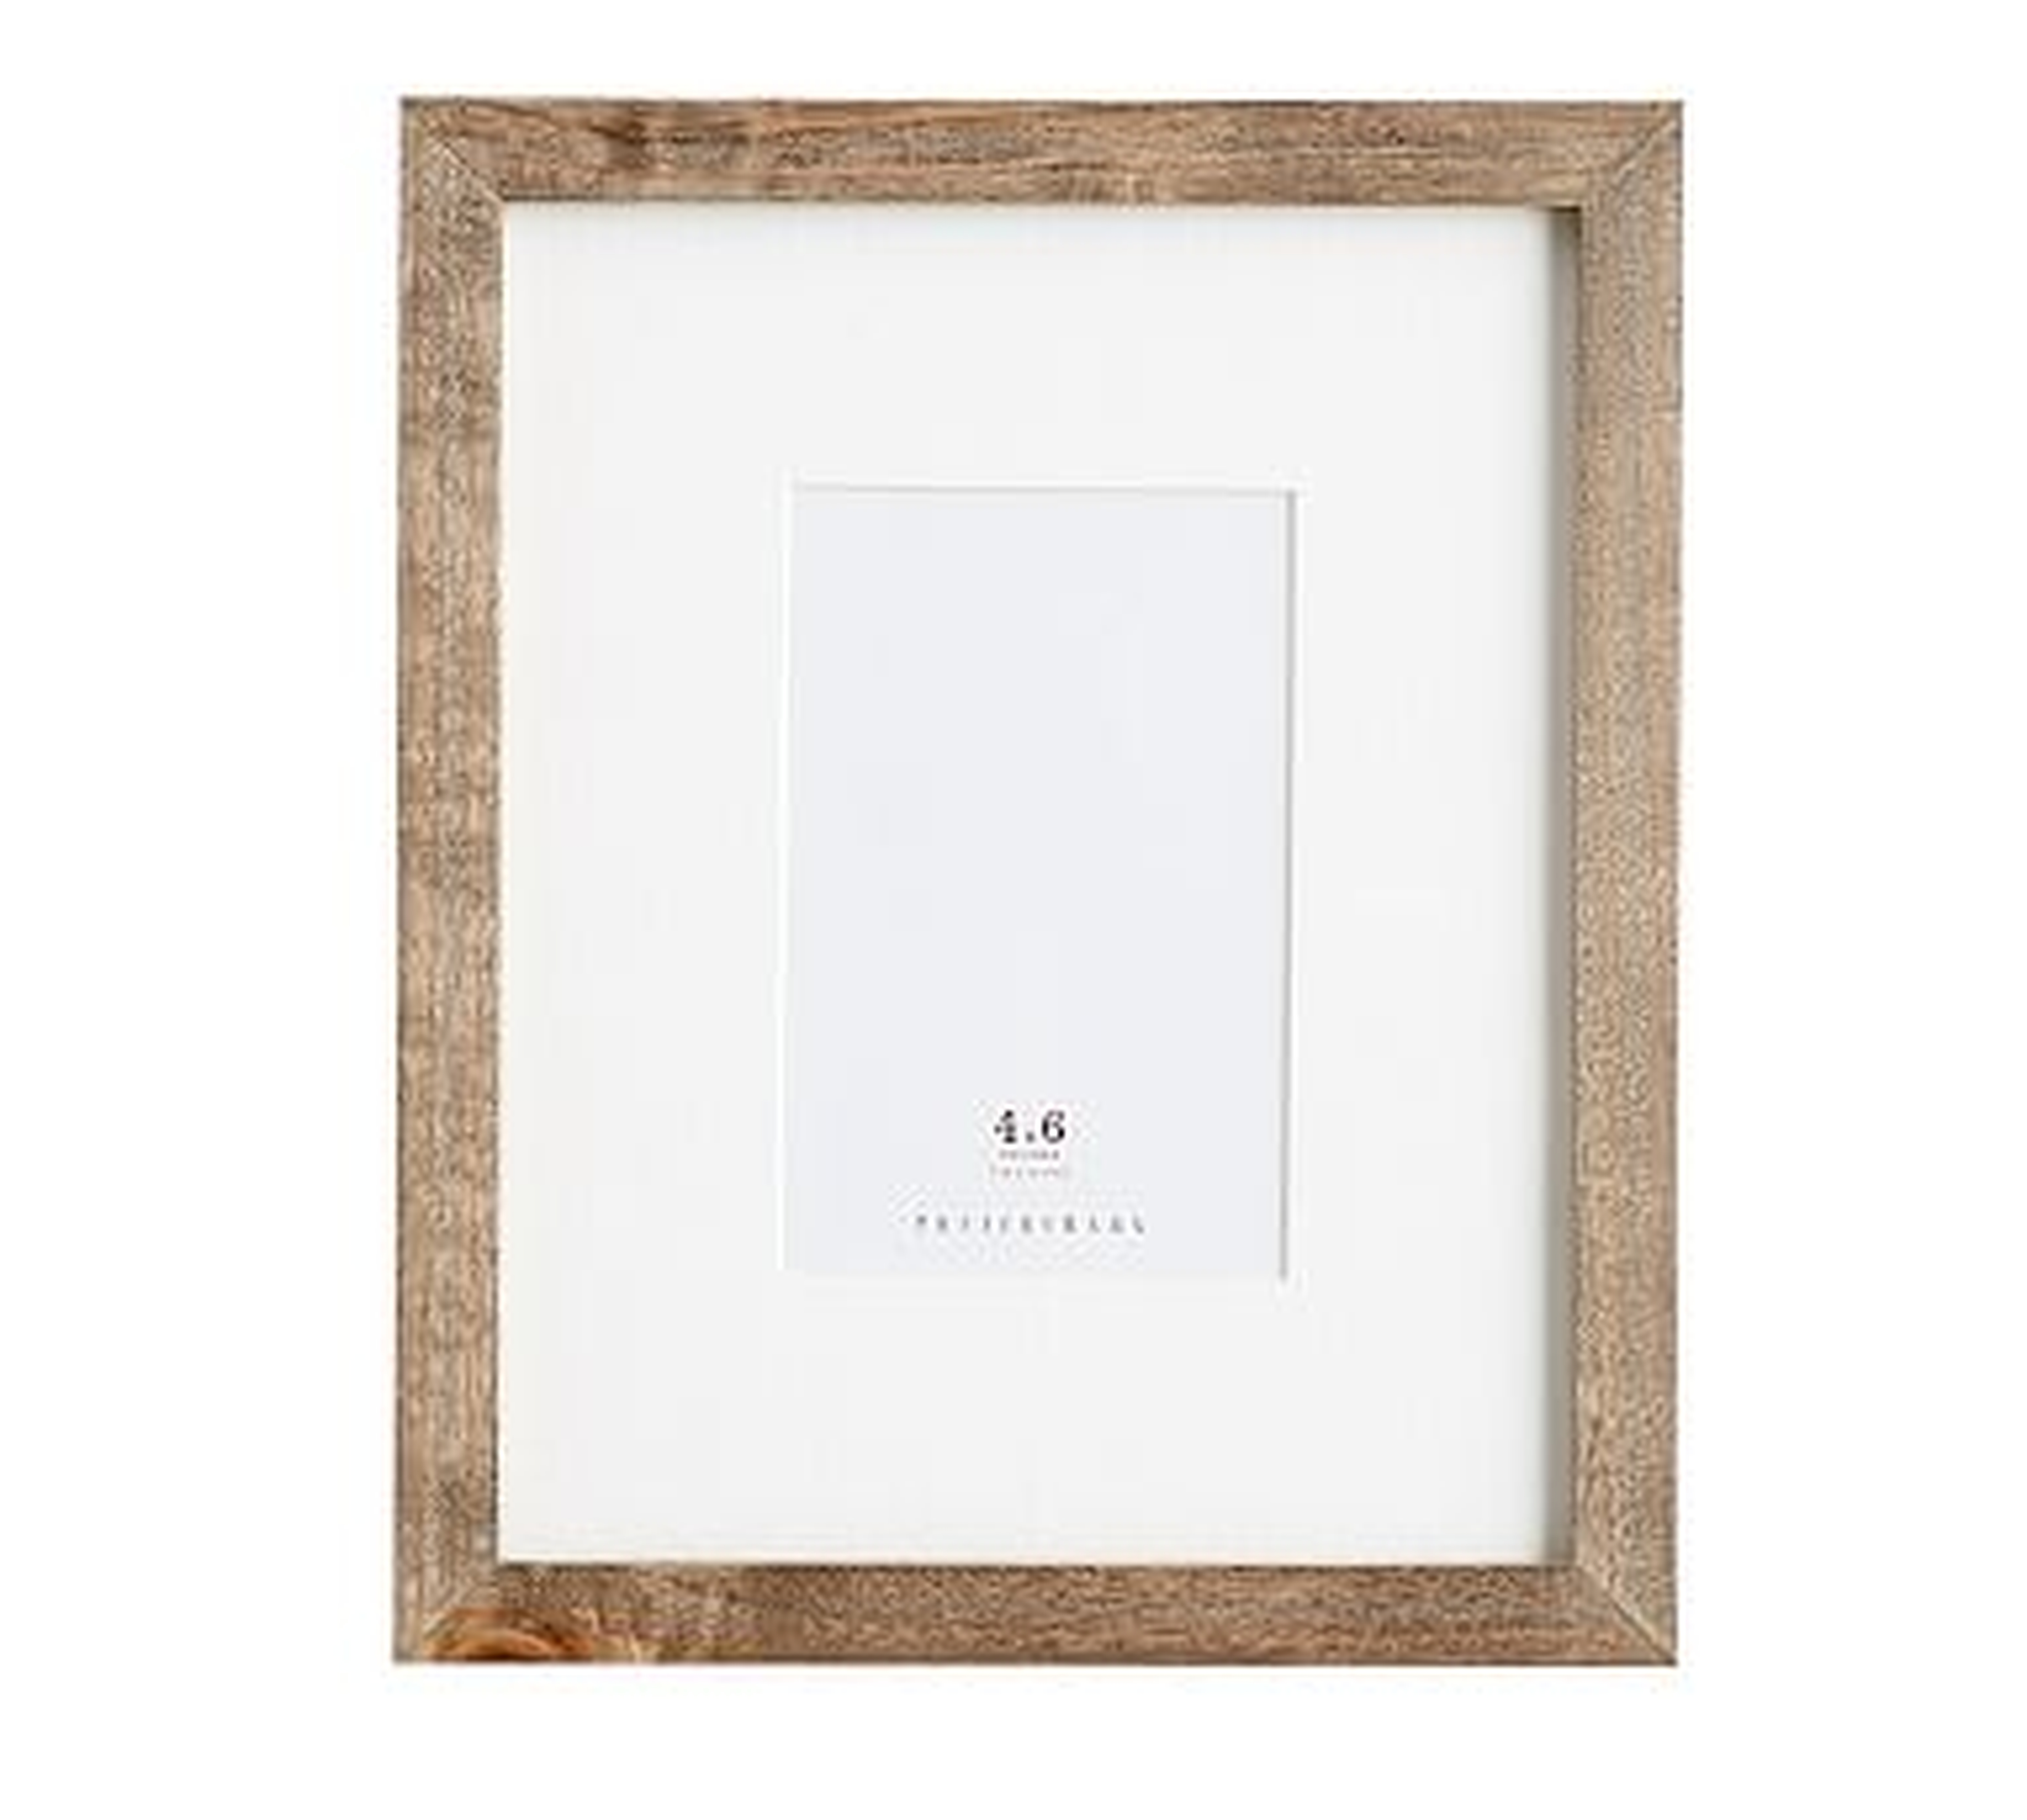 Wood Gallery Single Opening Frame, 4" x 6", Gray - Pottery Barn